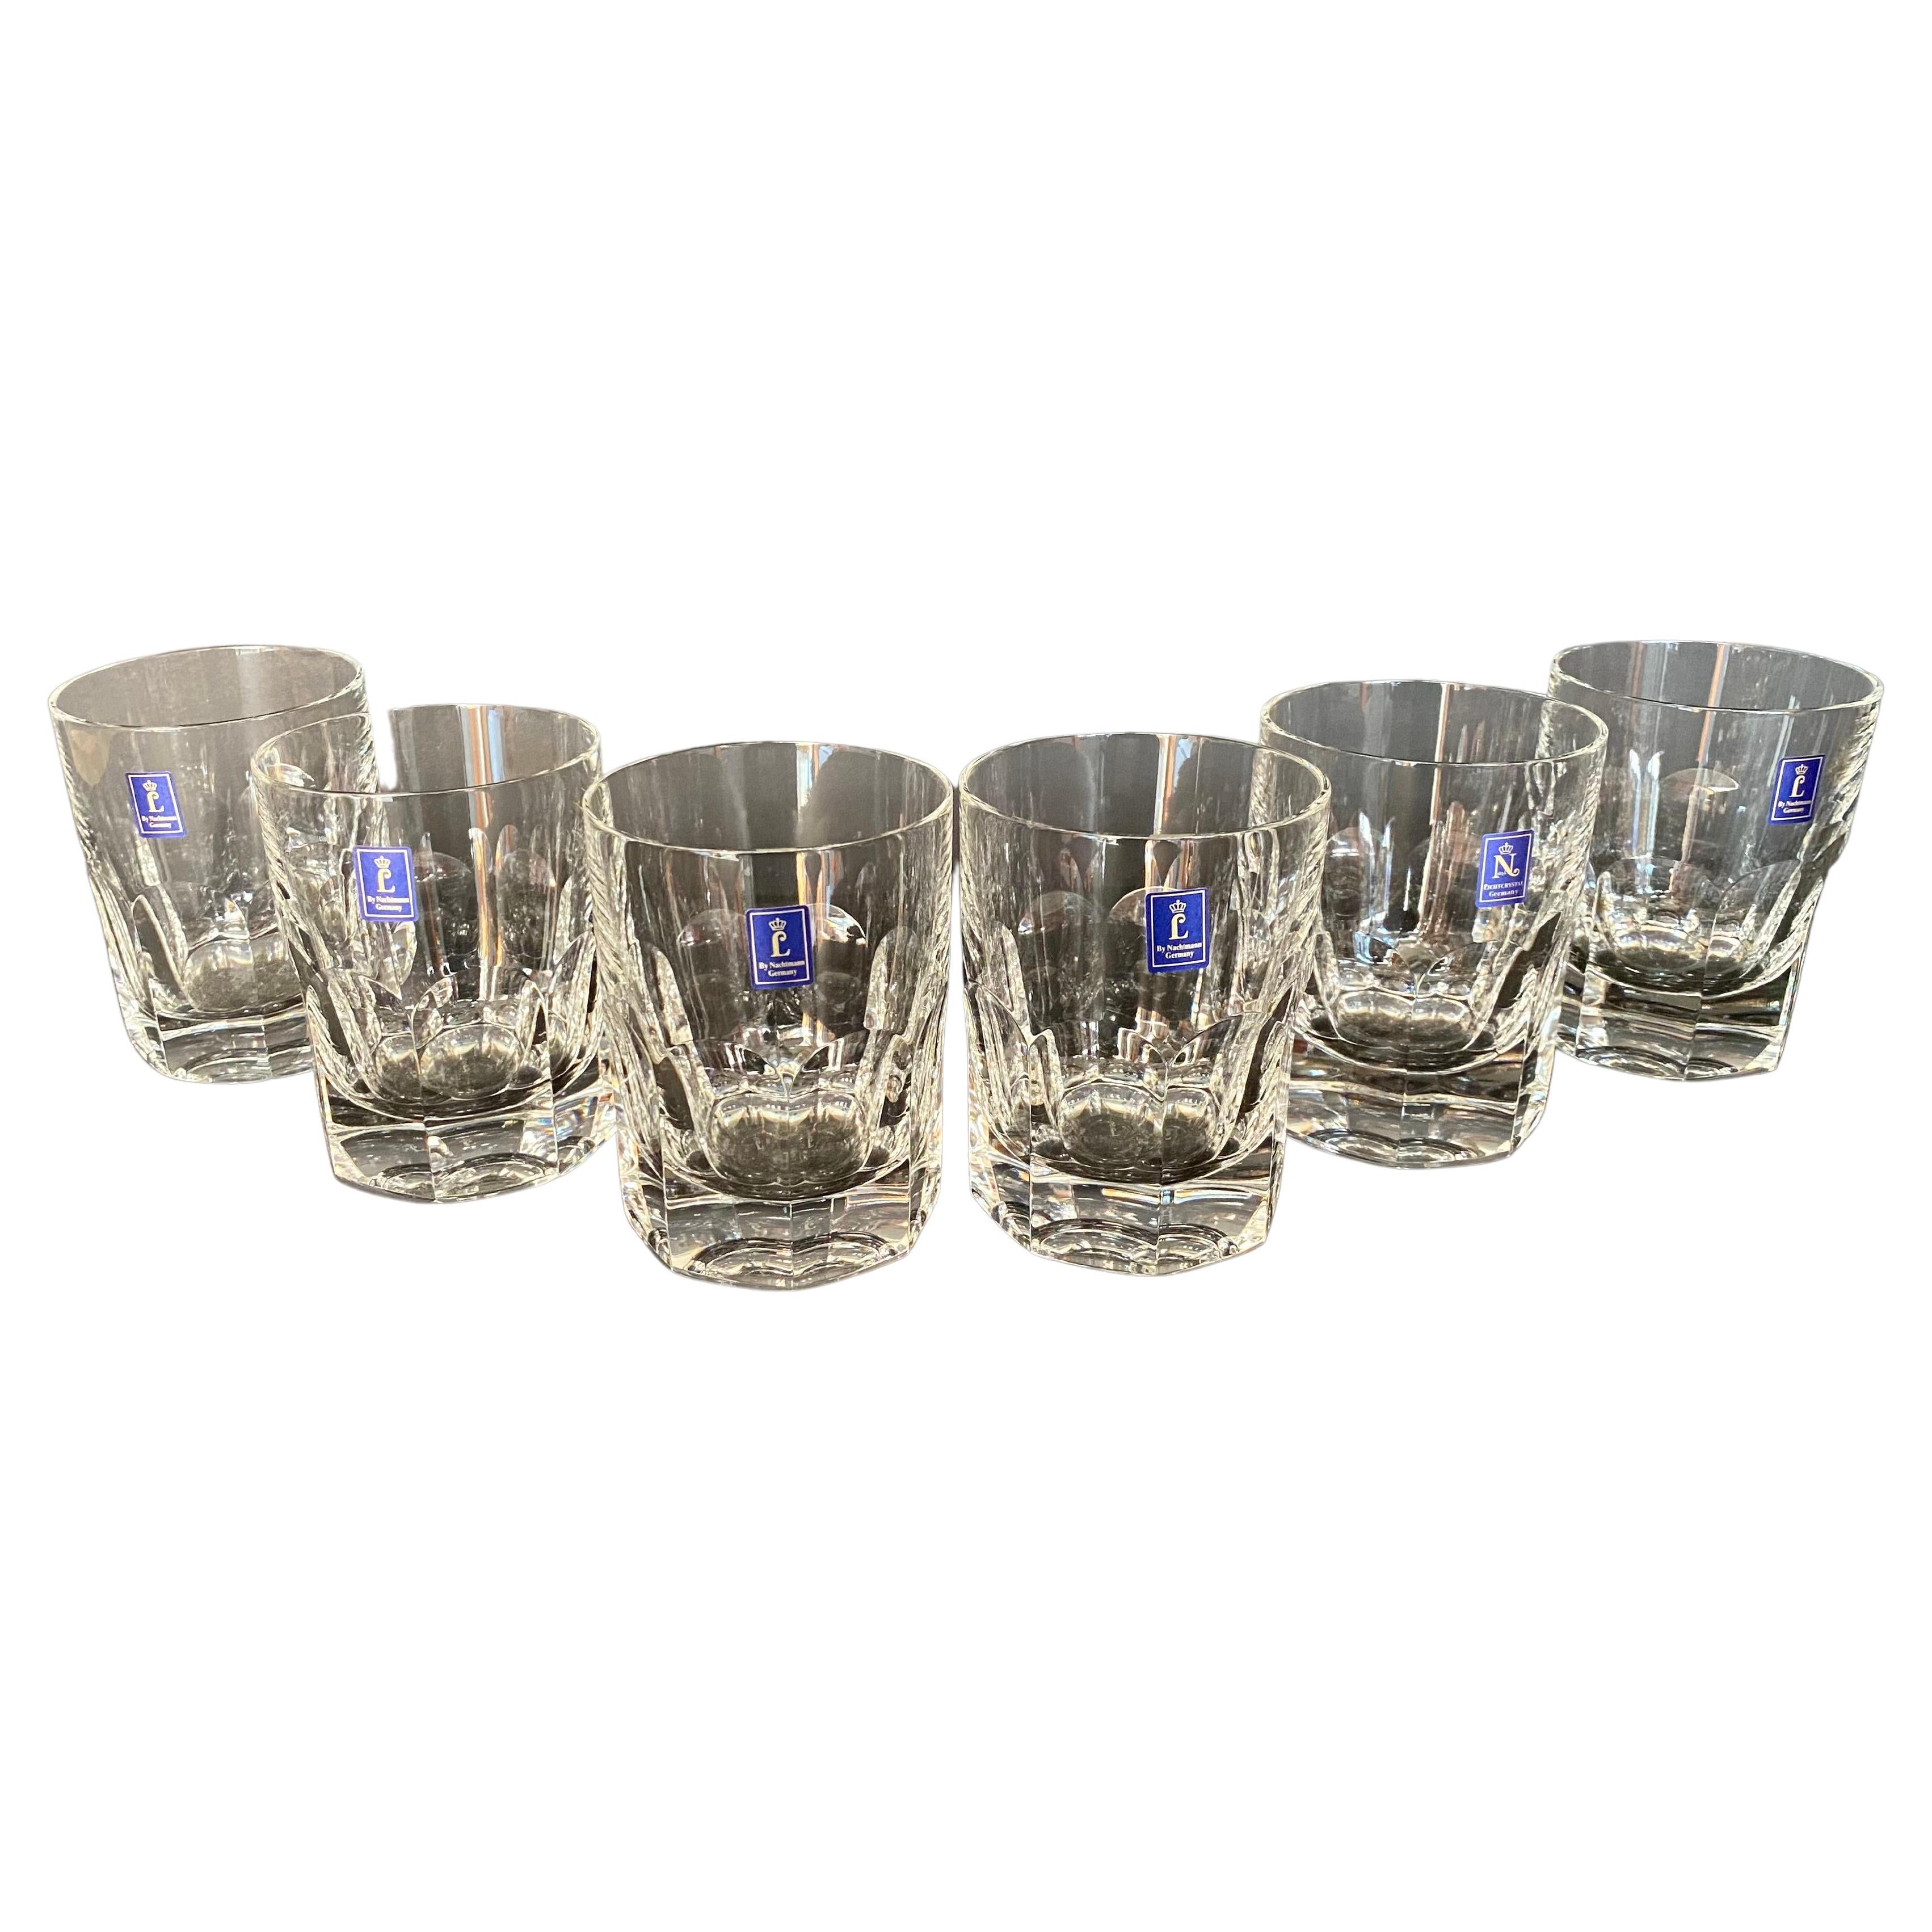 Nachtmann Set 6 Cut Crystal Whiskey Tumblers, Alexandra Series, Germany, 1990 For Sale